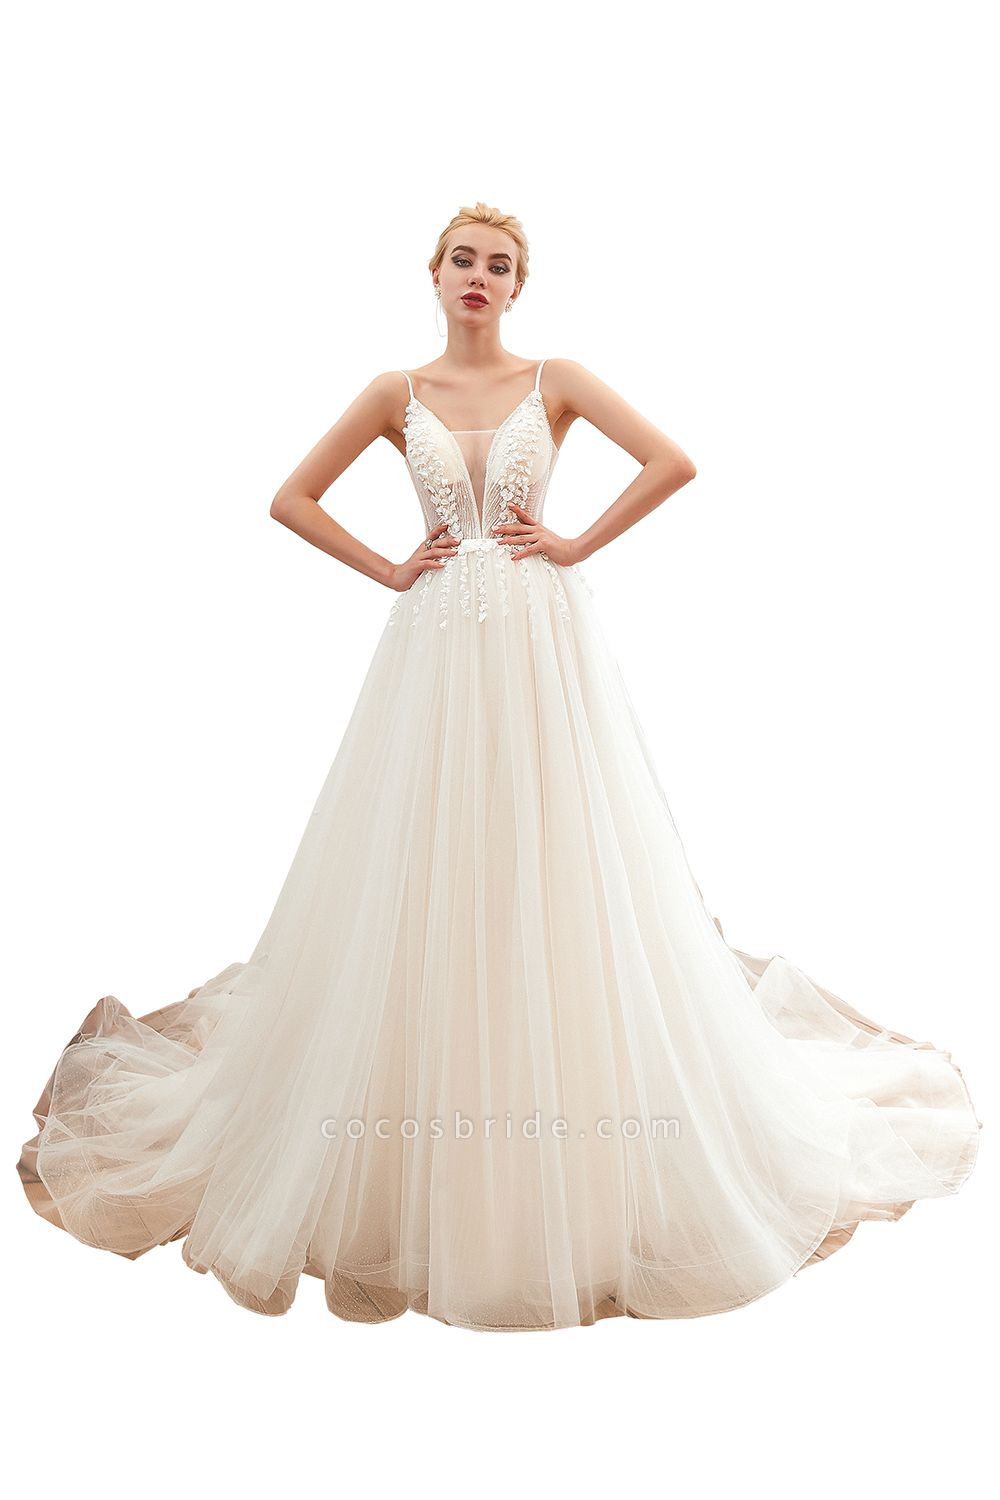 Awesome Spaghetti Strap Tulle A-line Wedding Dress